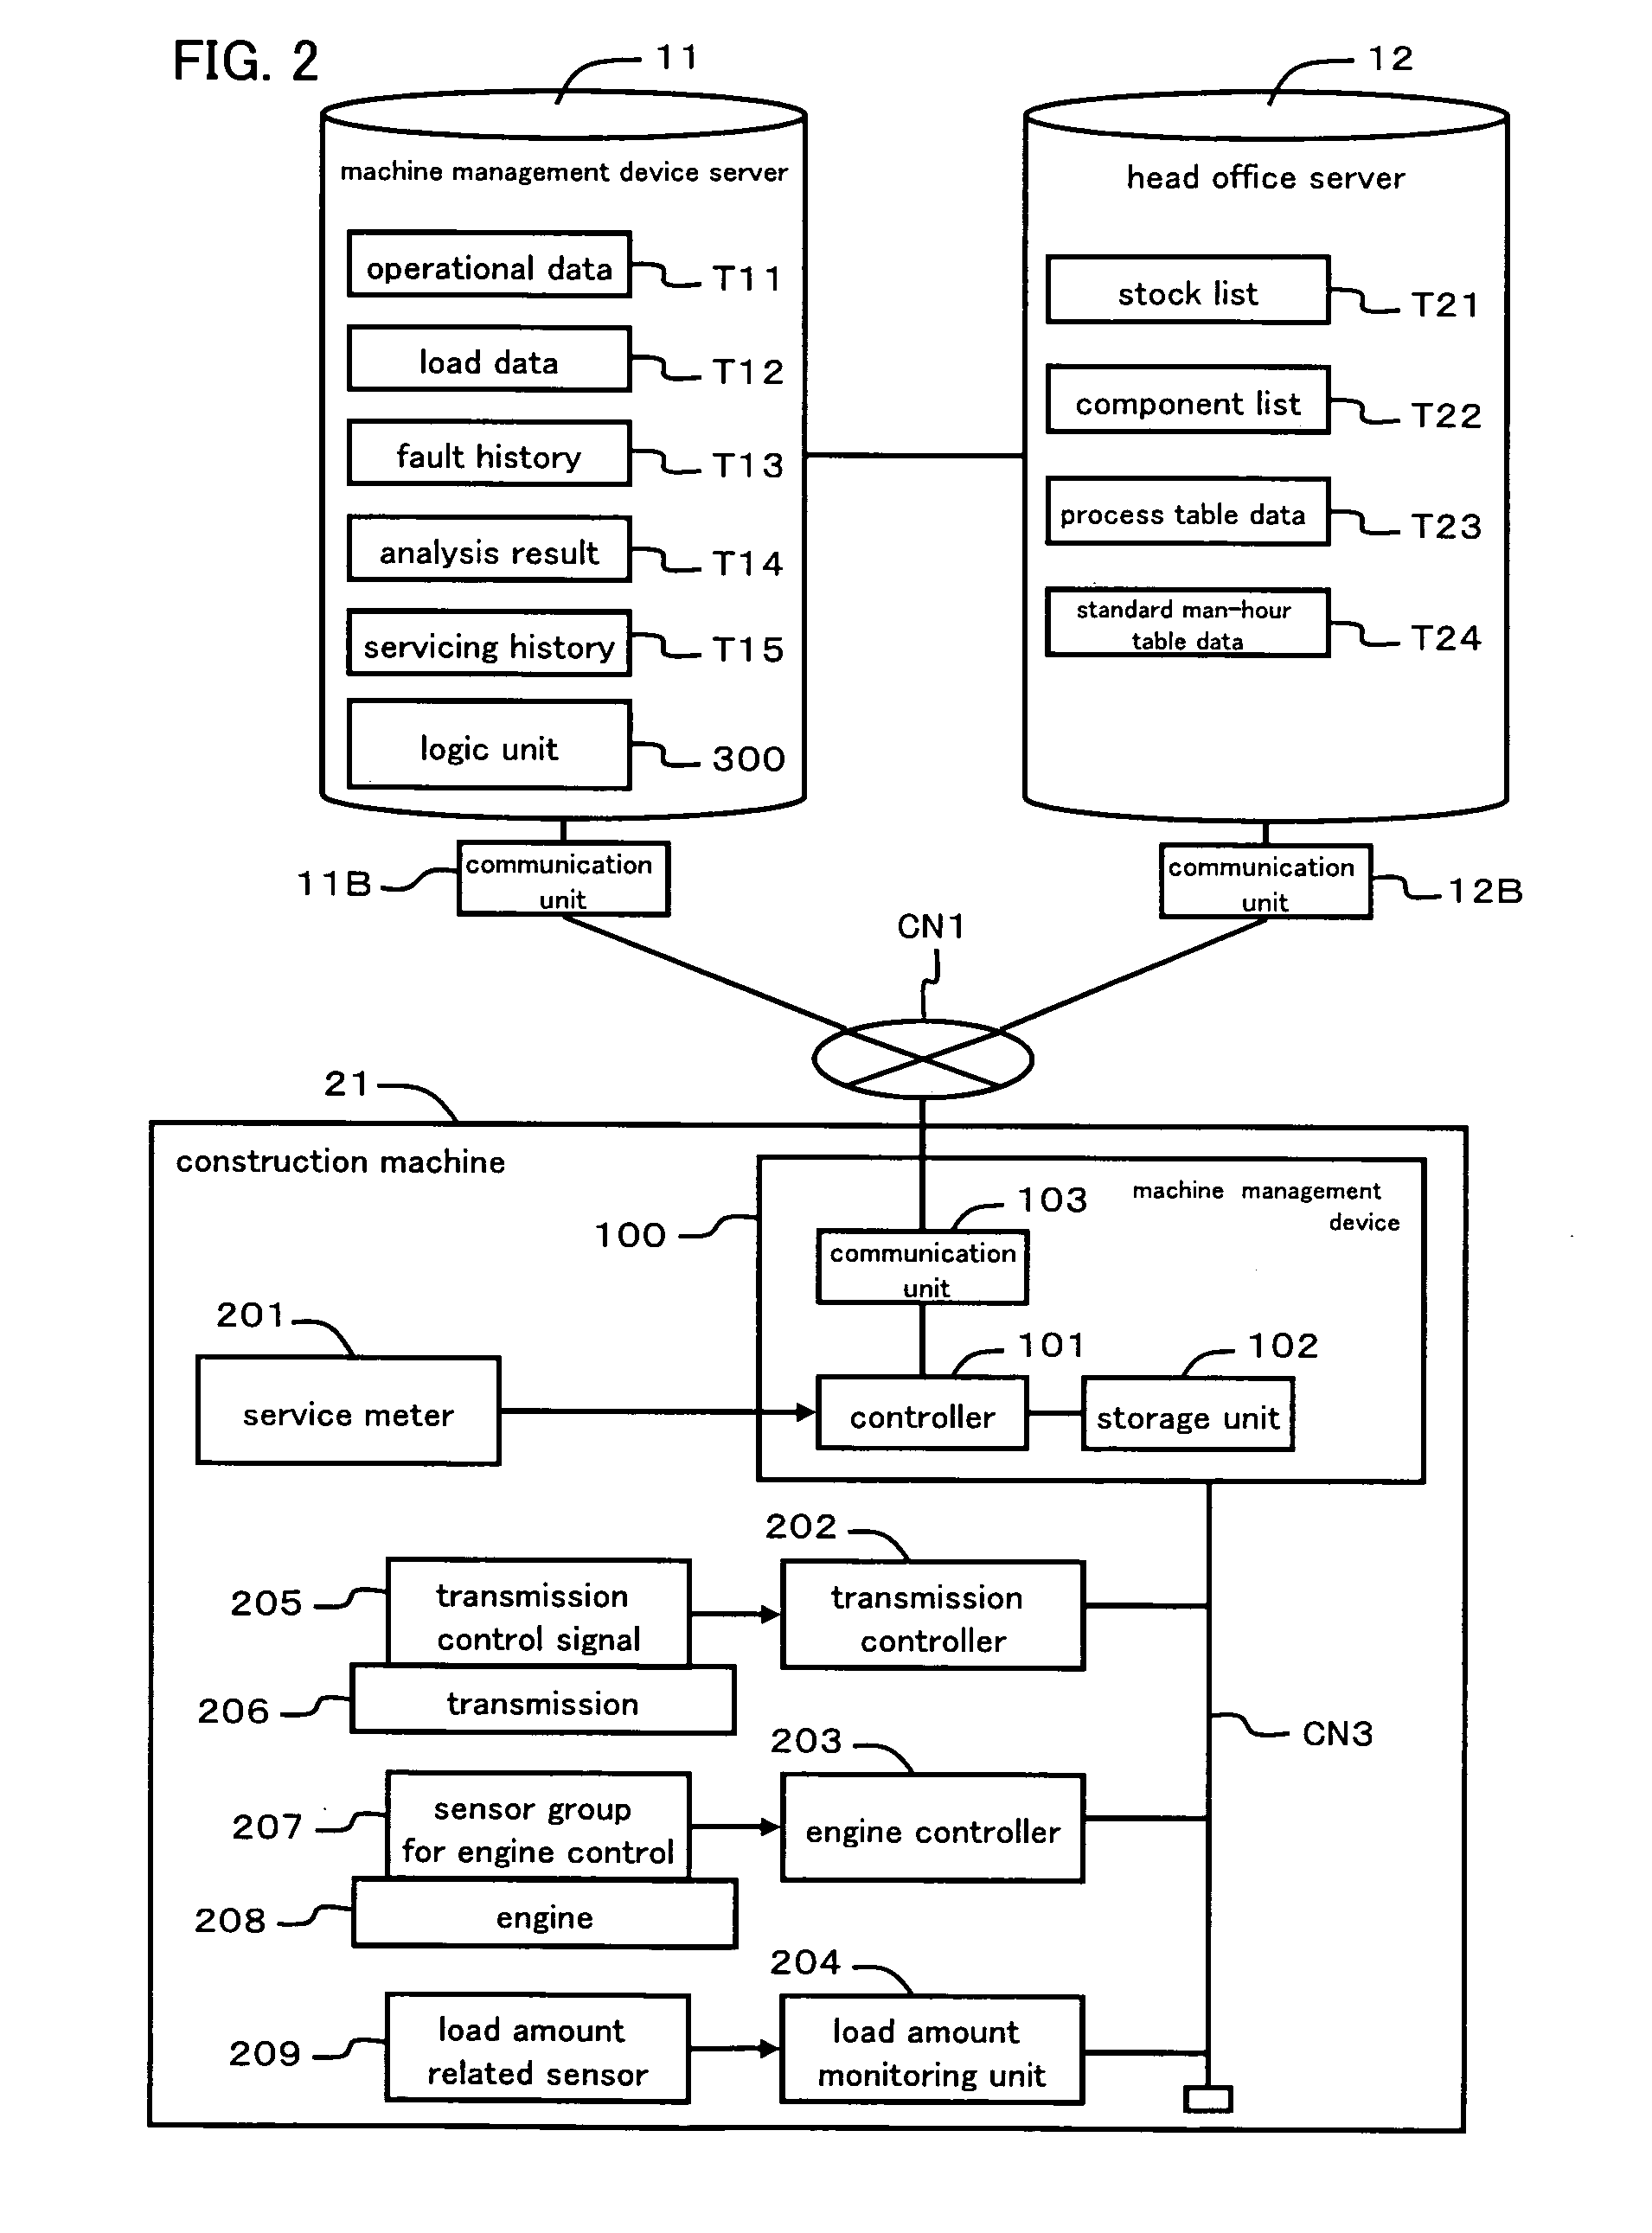 System for construction machine maintenance based on predicted service life